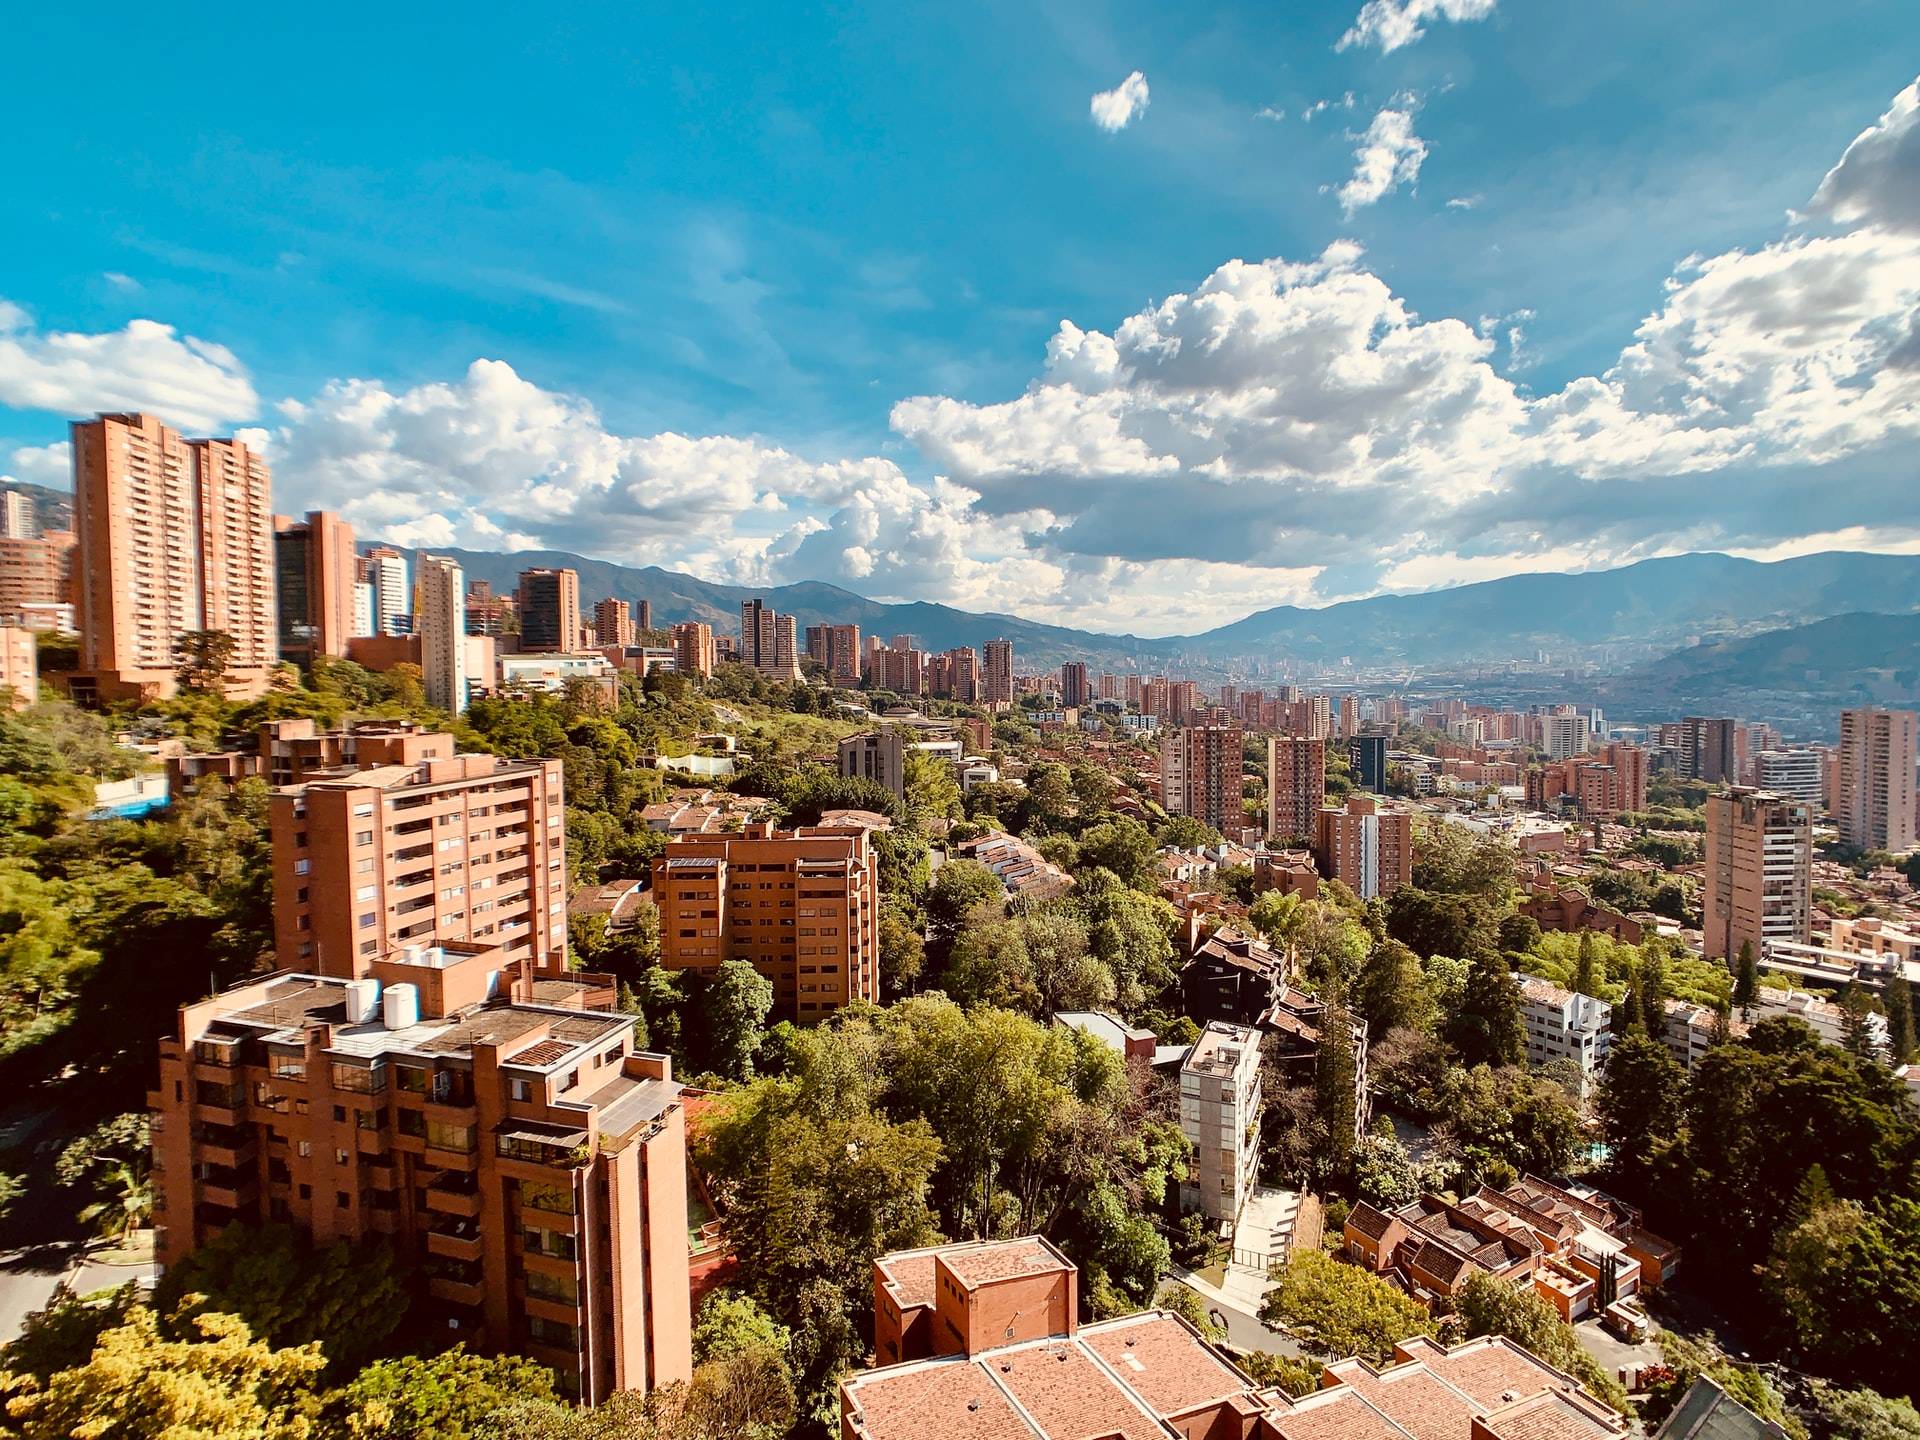 How Medellin Is on Track to Colombia’s Startup City Casacol